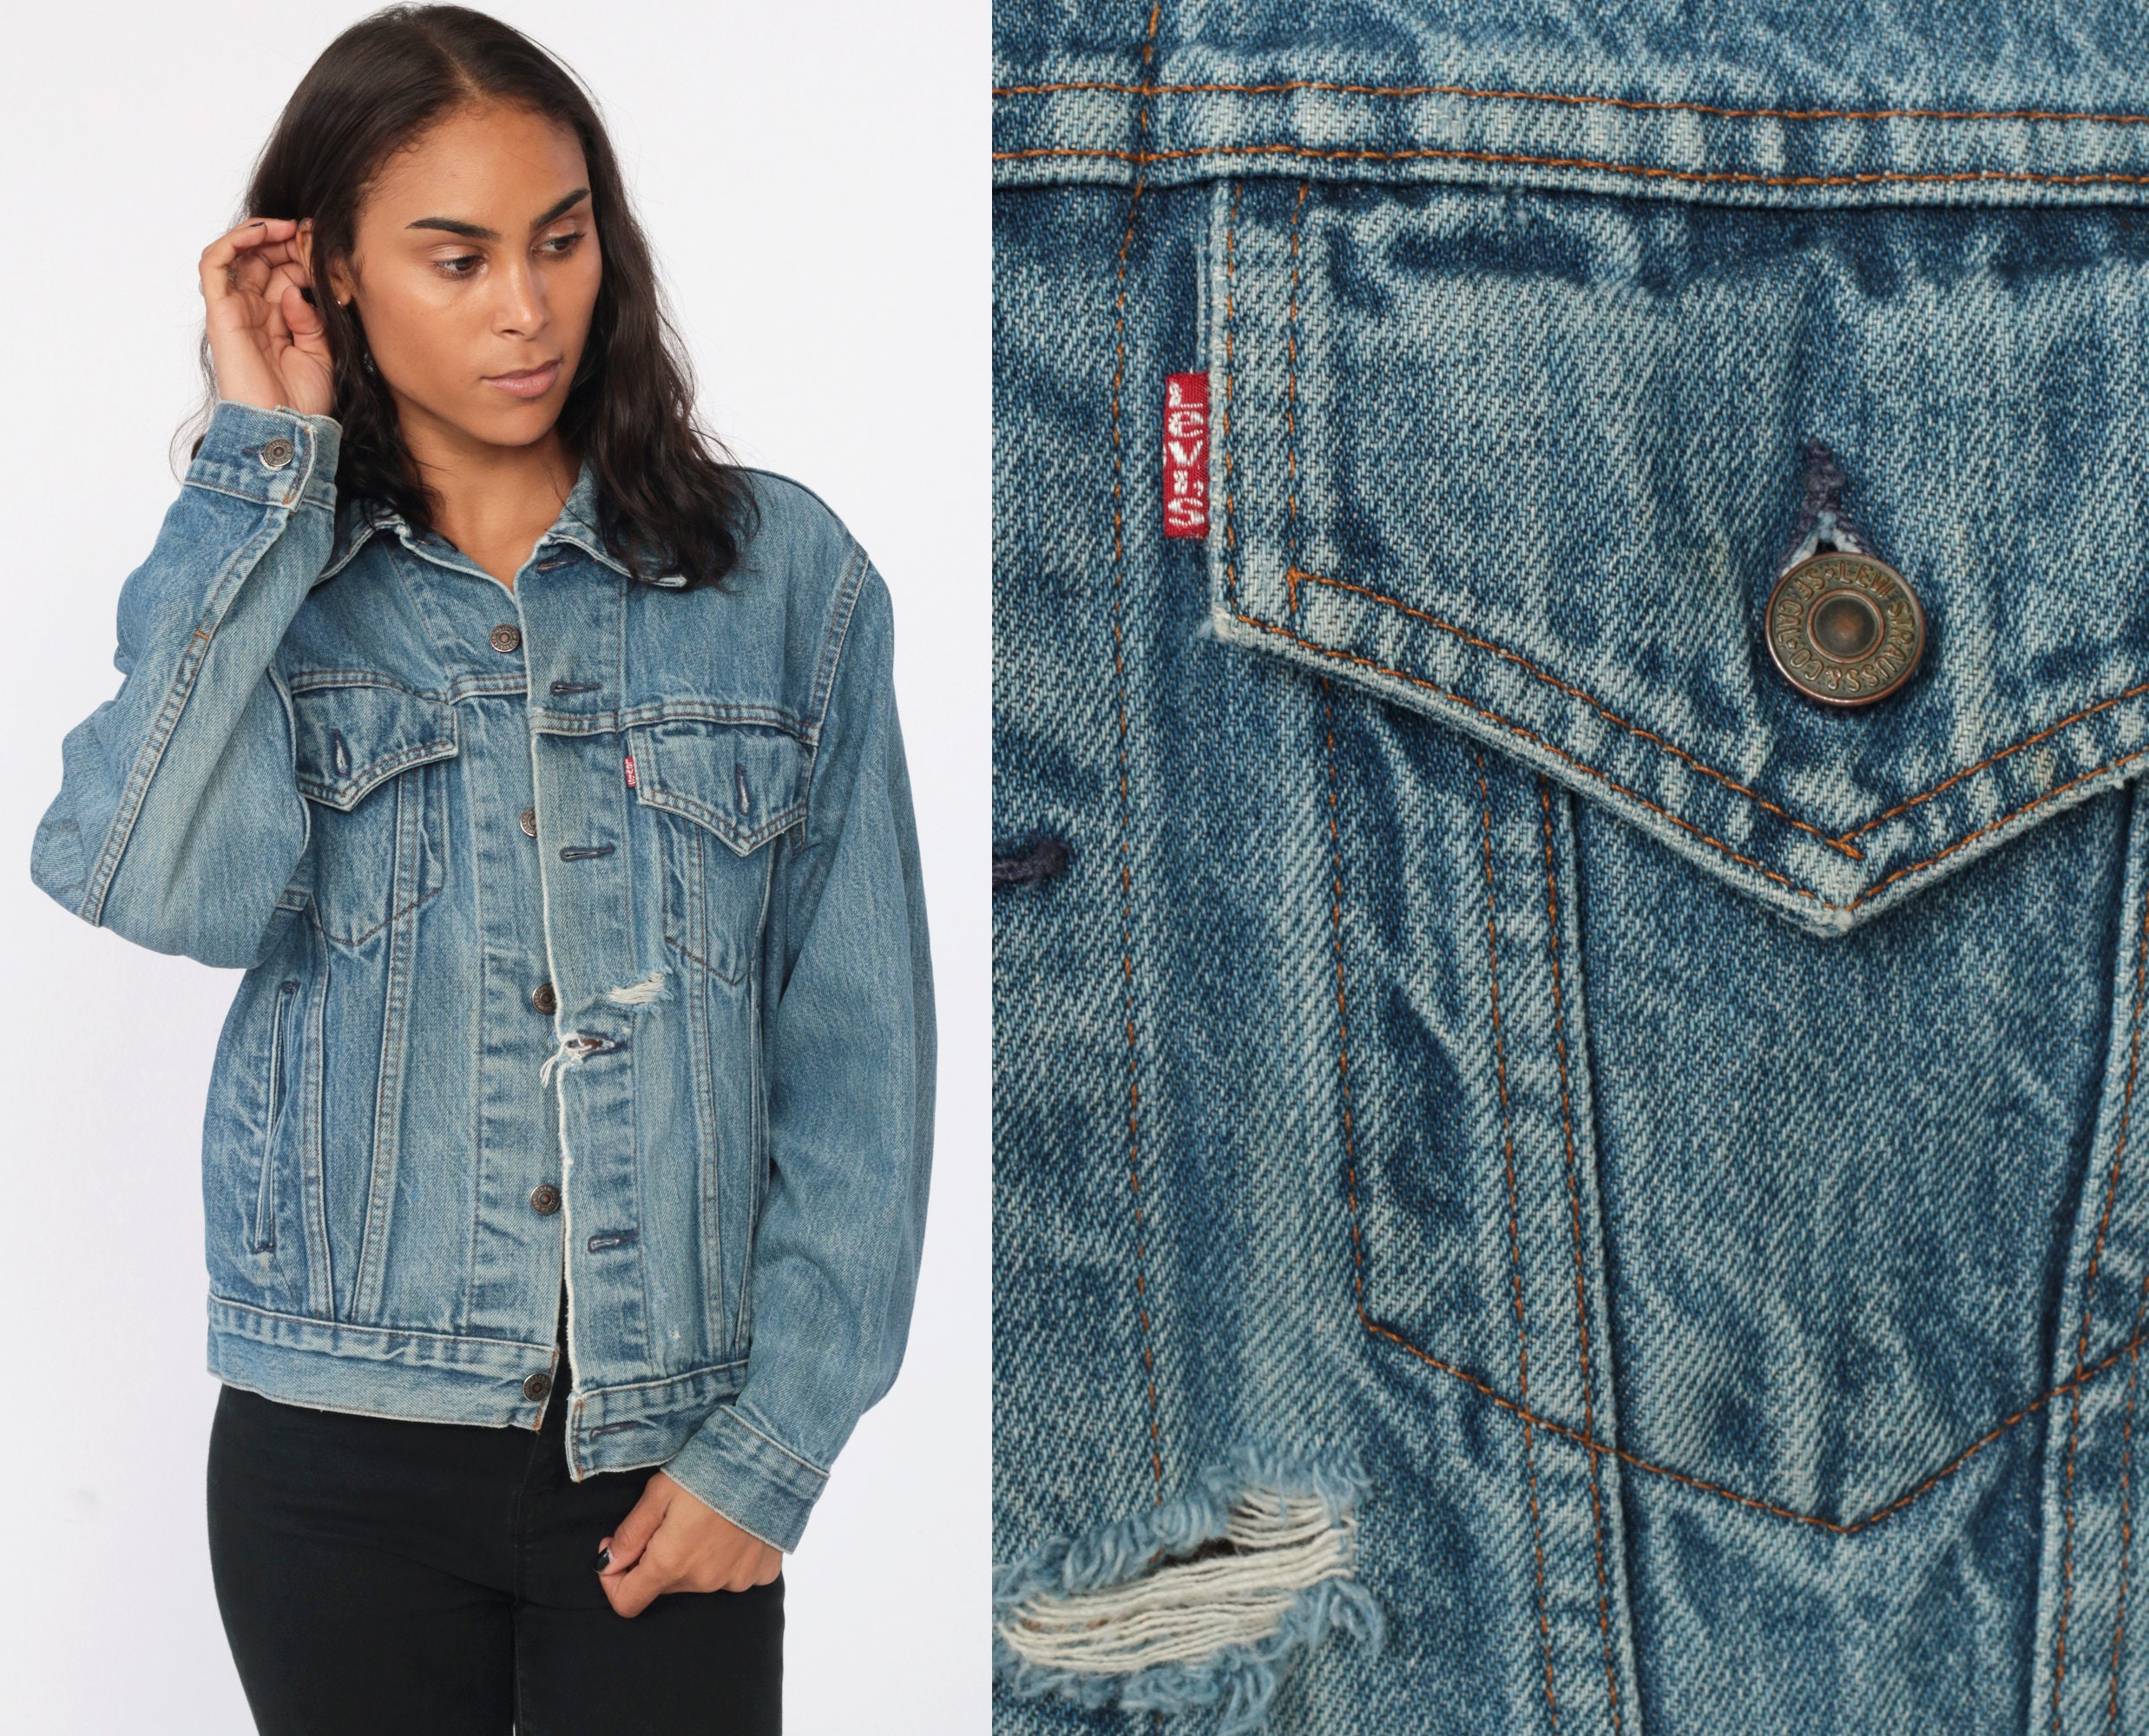 Levis Jean Jacket 80s Distressed Denim Jacket Faded RIPPED - Etsy New  Zealand